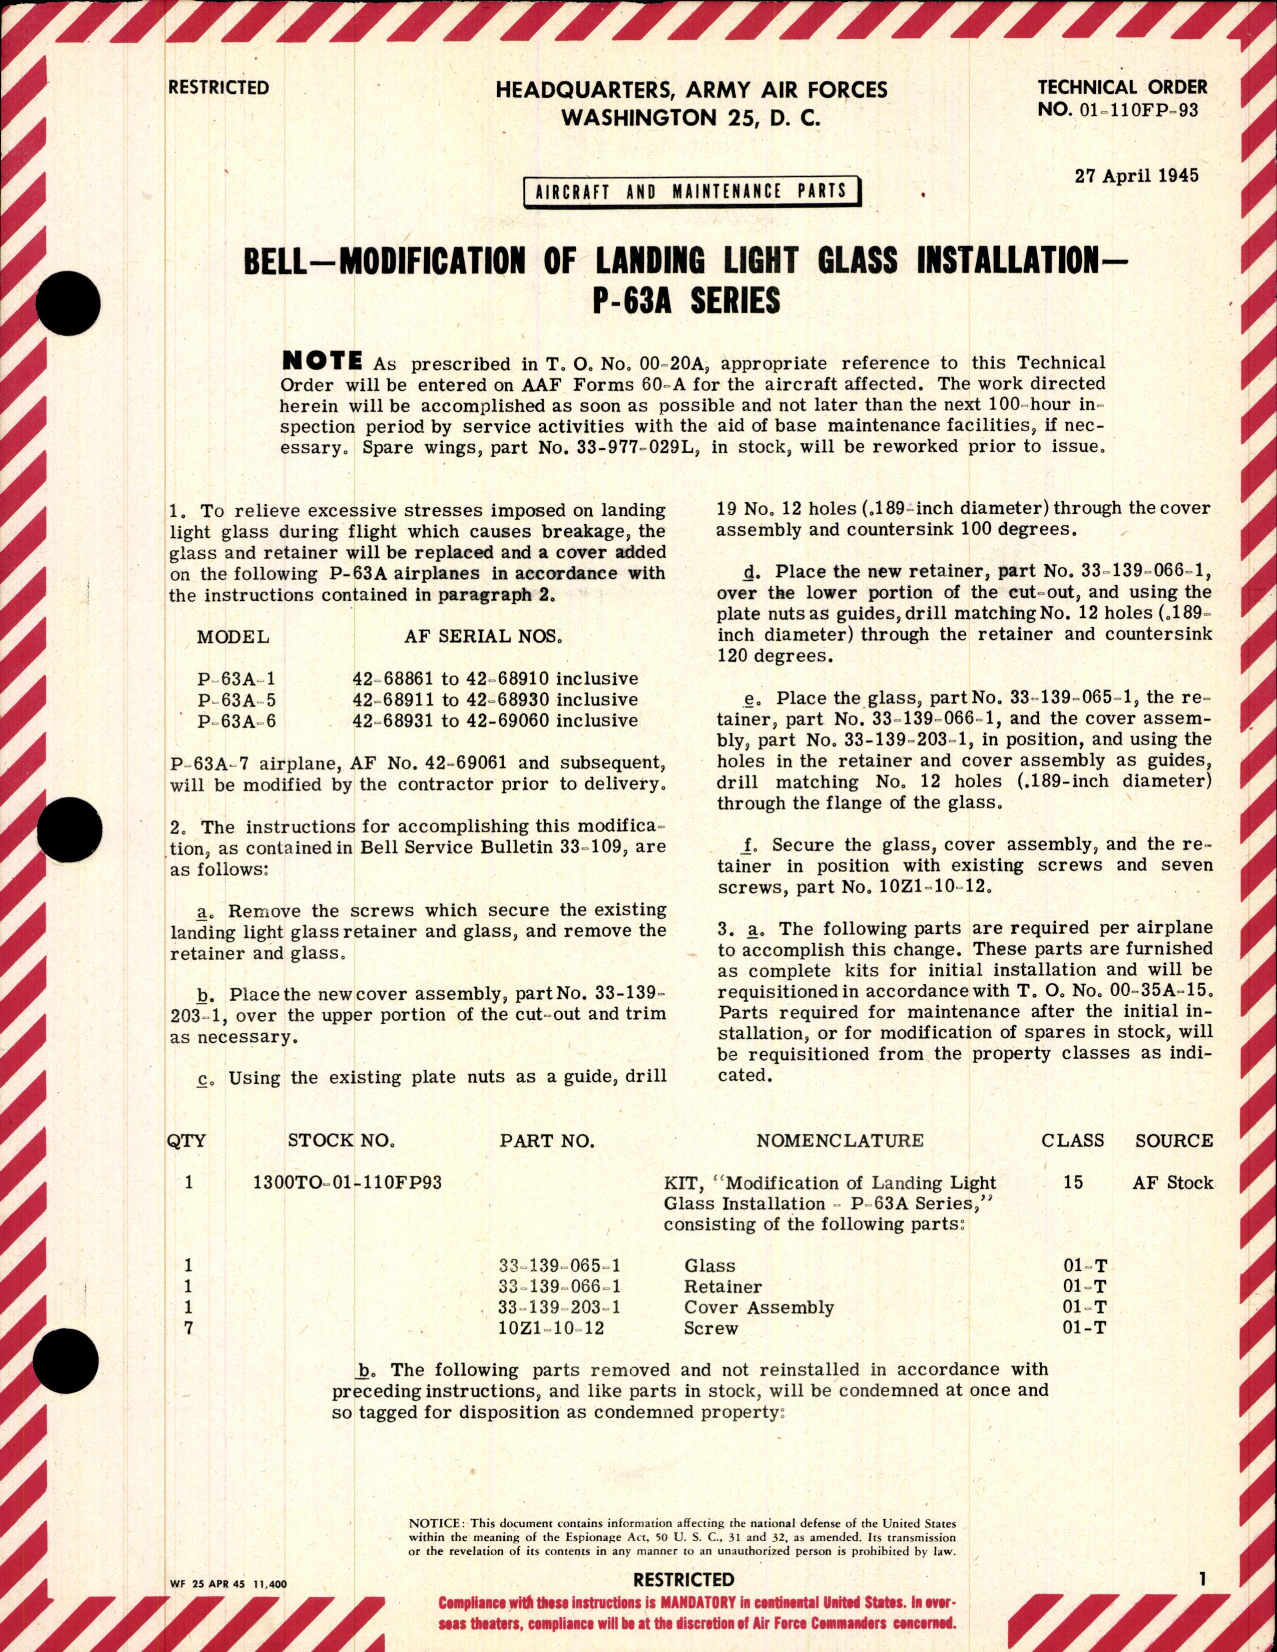 Sample page 1 from AirCorps Library document: Modification of Landing Light Glass Installation